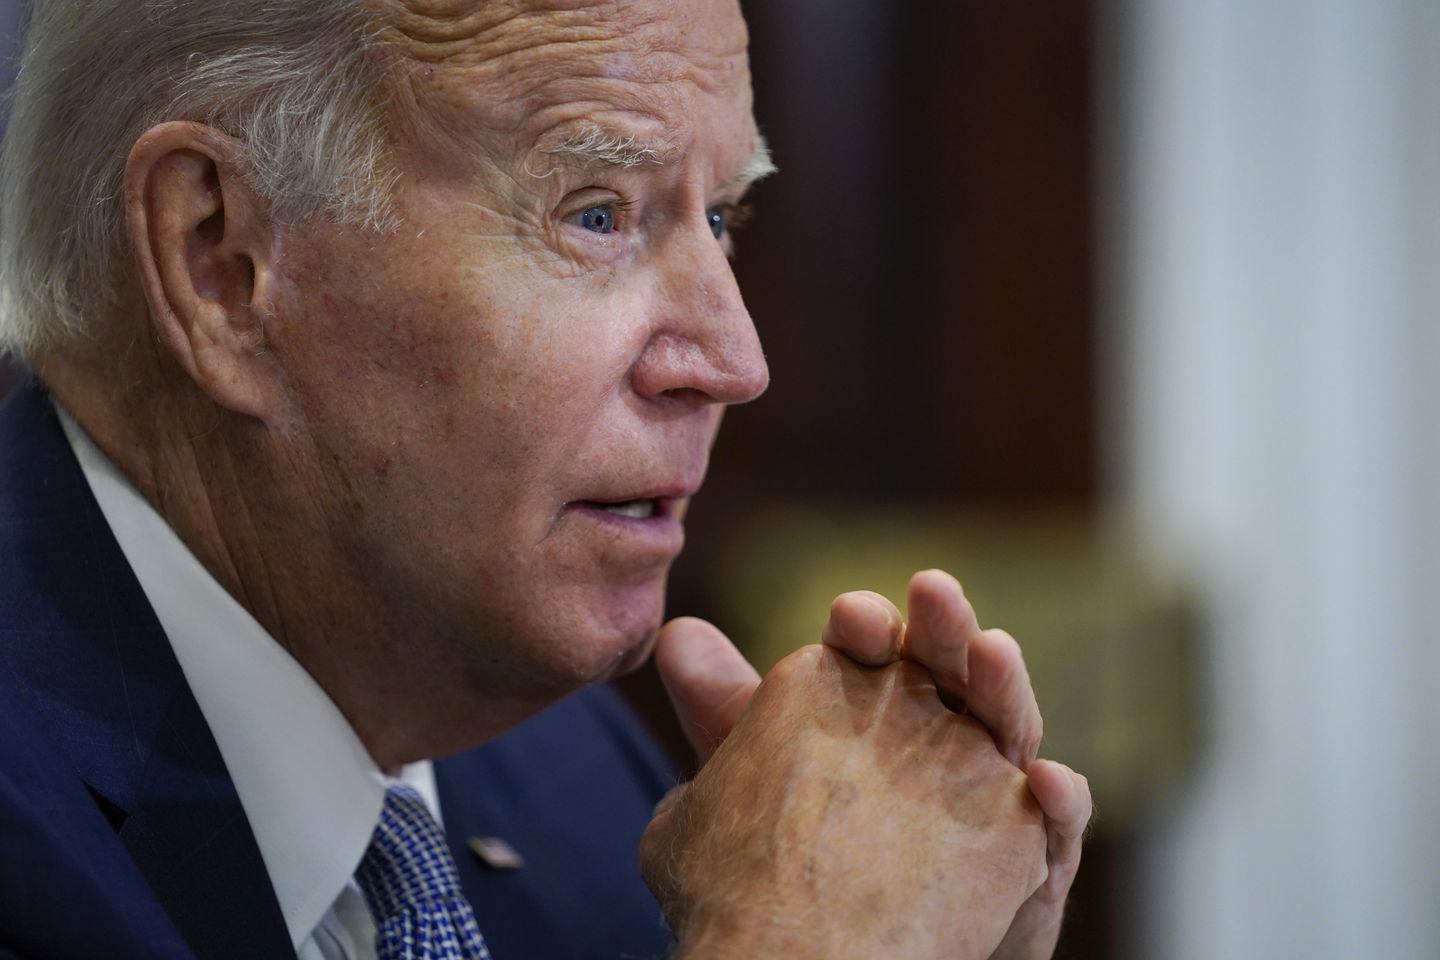 Biden officials tried to restrict nuclear arms use